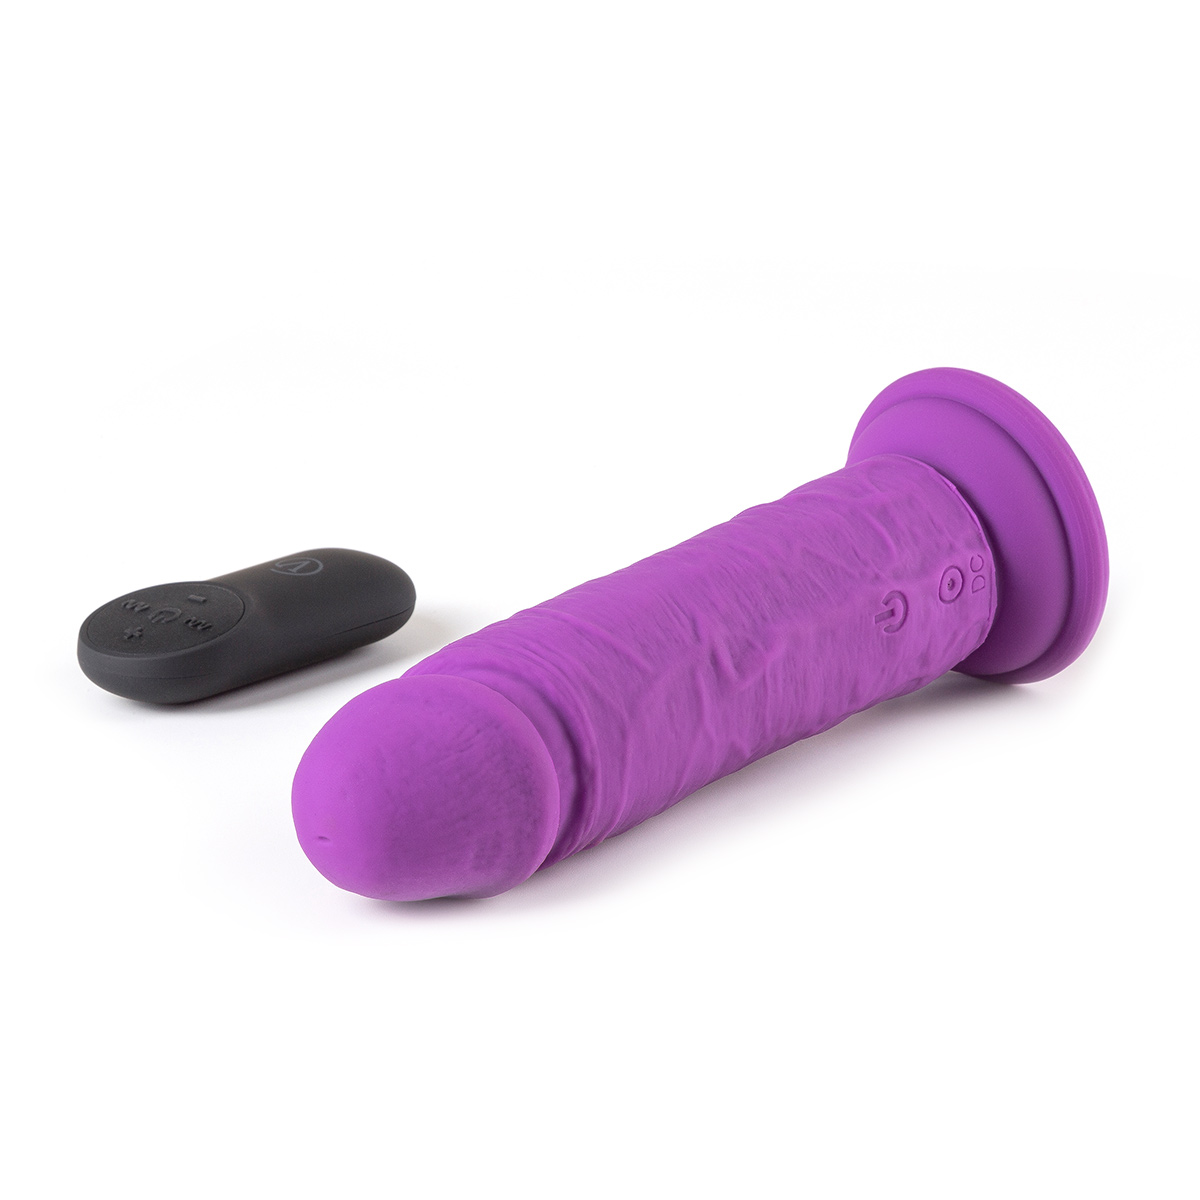 Vibrating-Realistic-with-Remote-R11-Purple-OPR-3090094-1